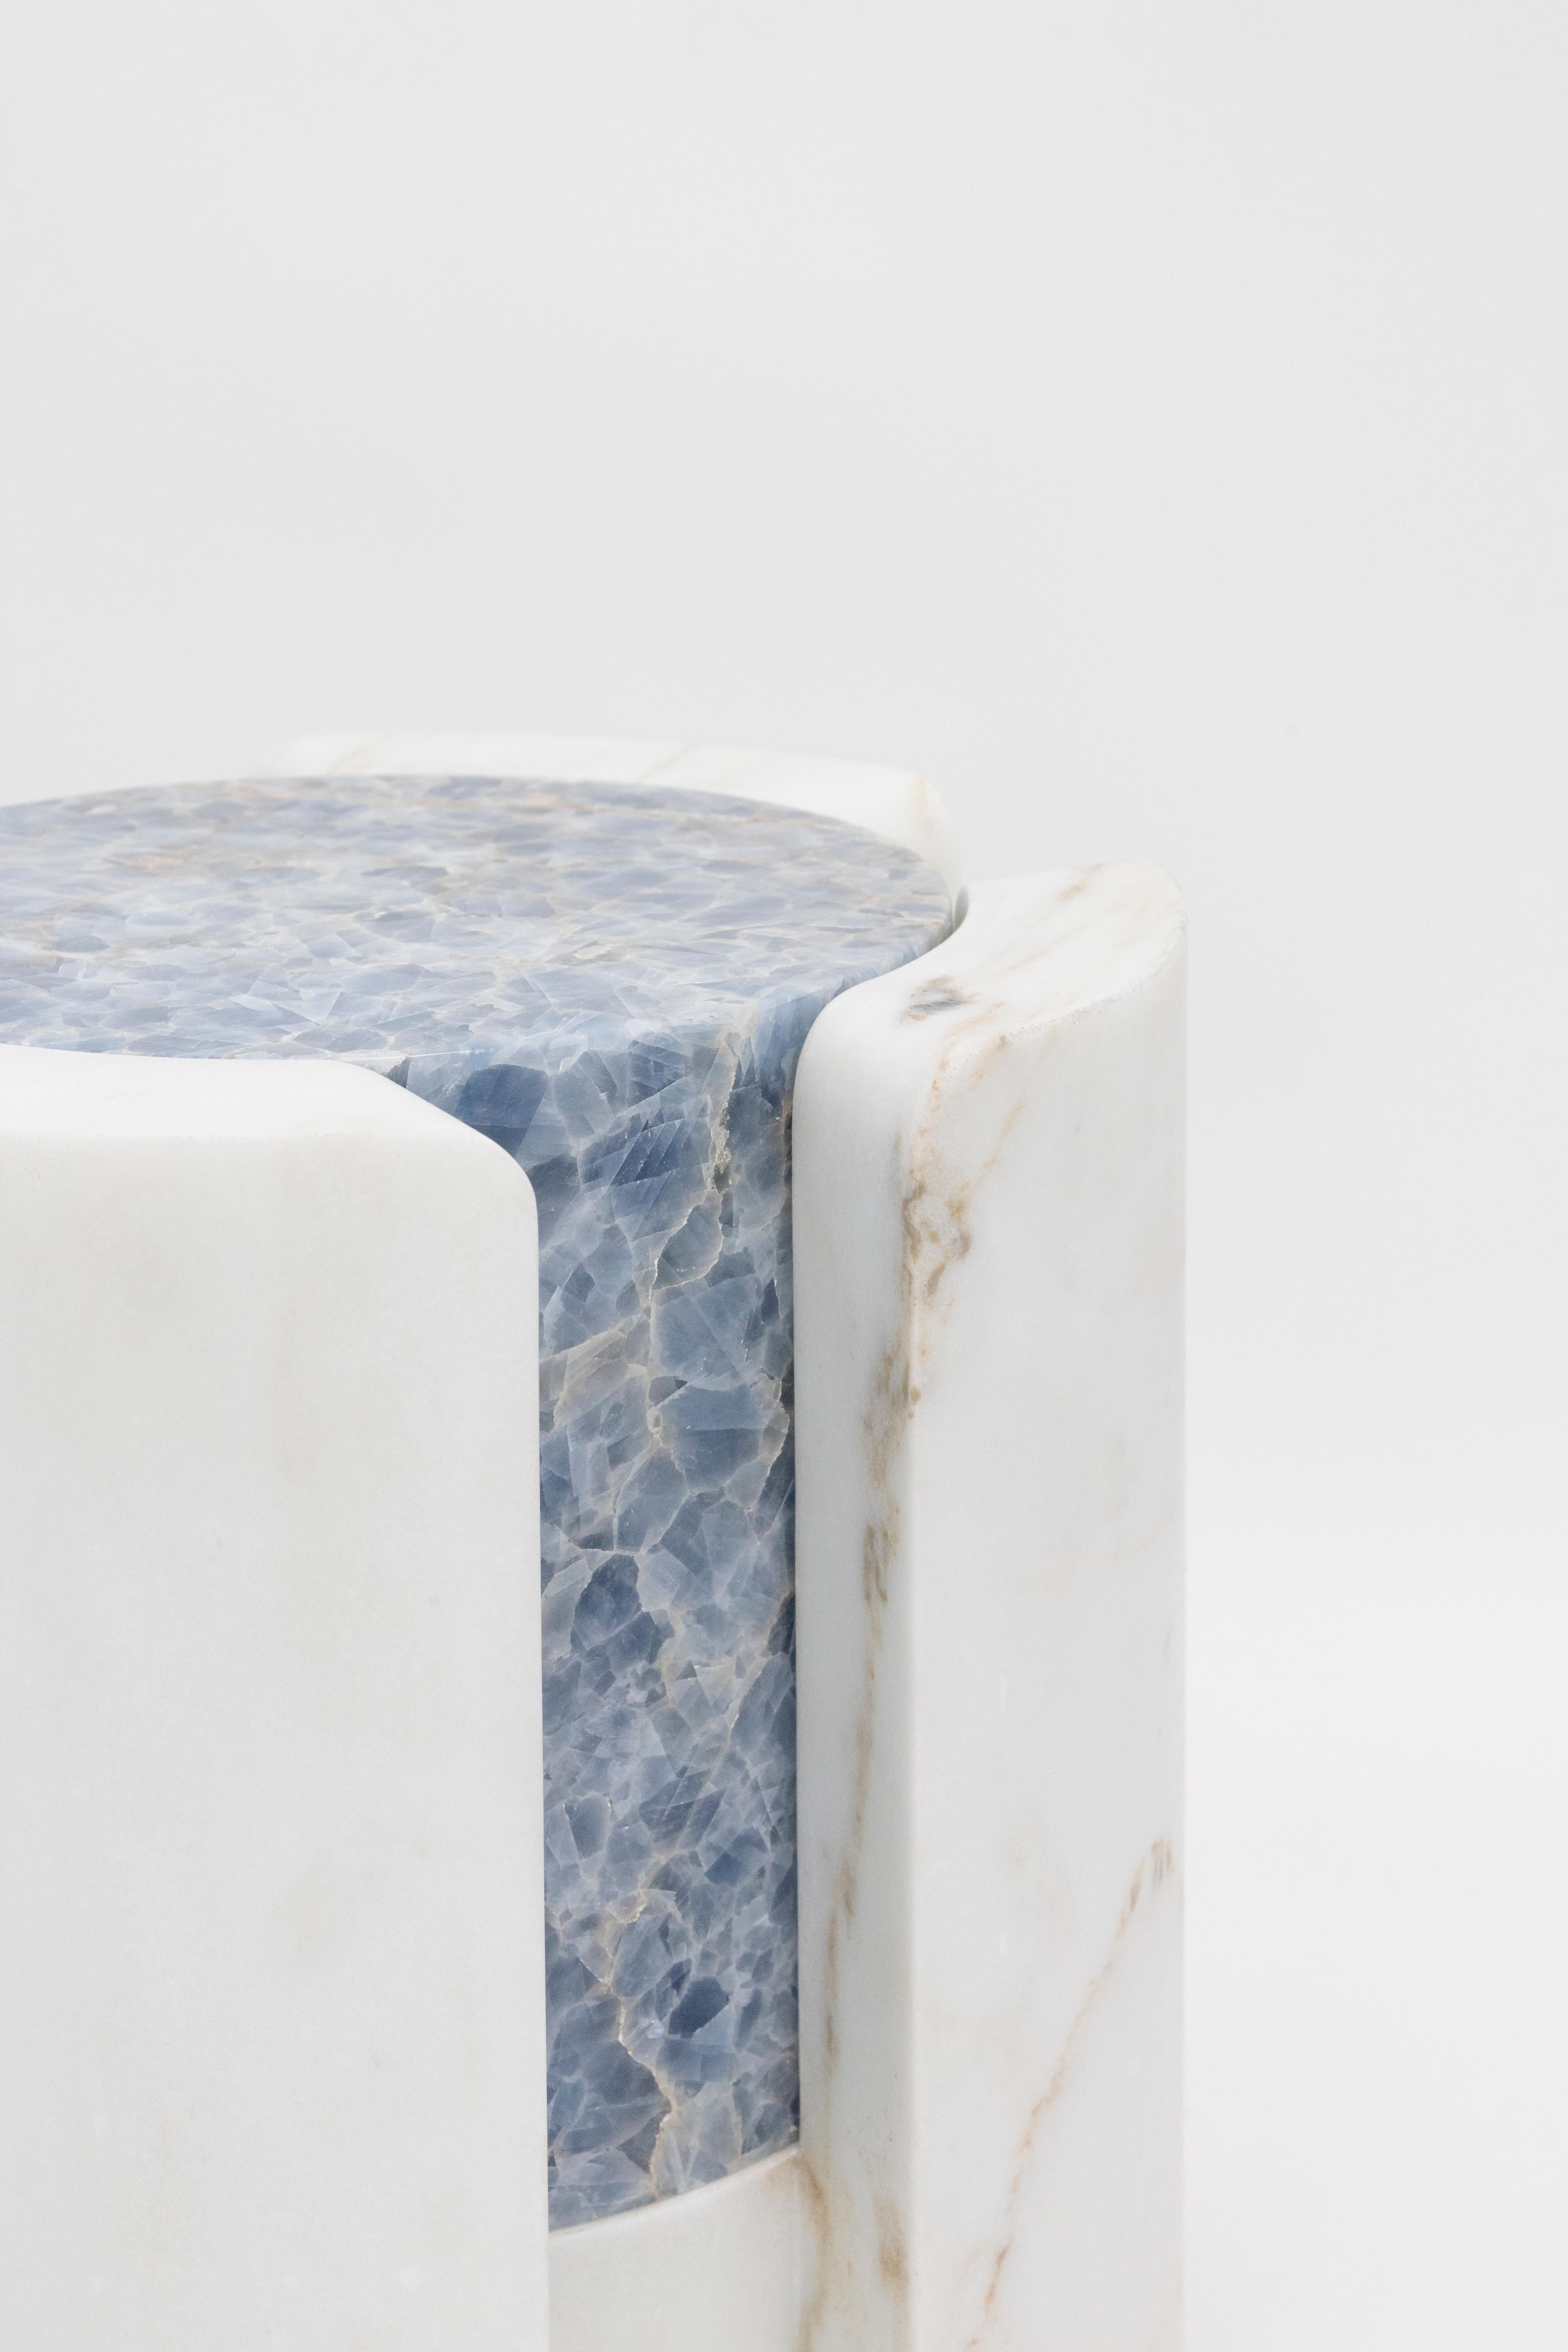 Hand-Crafted Volcanic Shades of marble III - Sten Studio - Golden calacatta and blue calcite For Sale